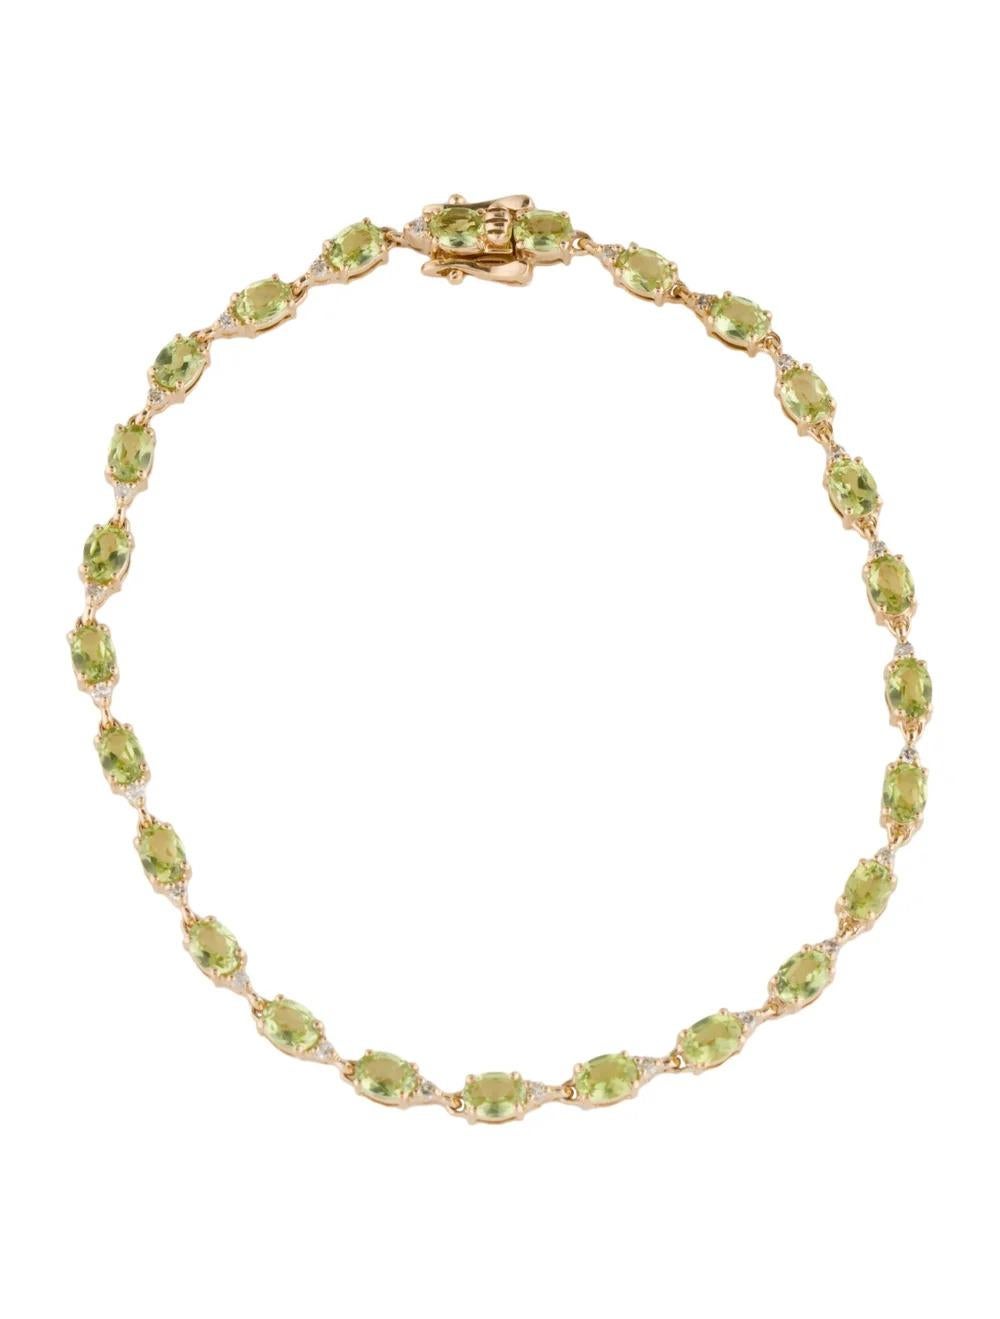 Elevate your style with this exquisite 14K Yellow Gold Tennis Bracelet, adorned with Oval Modified Brilliant Peridots and sparkling Diamonds. Crafted to perfection, this bracelet exudes elegance and sophistication, making it a timeless addition to